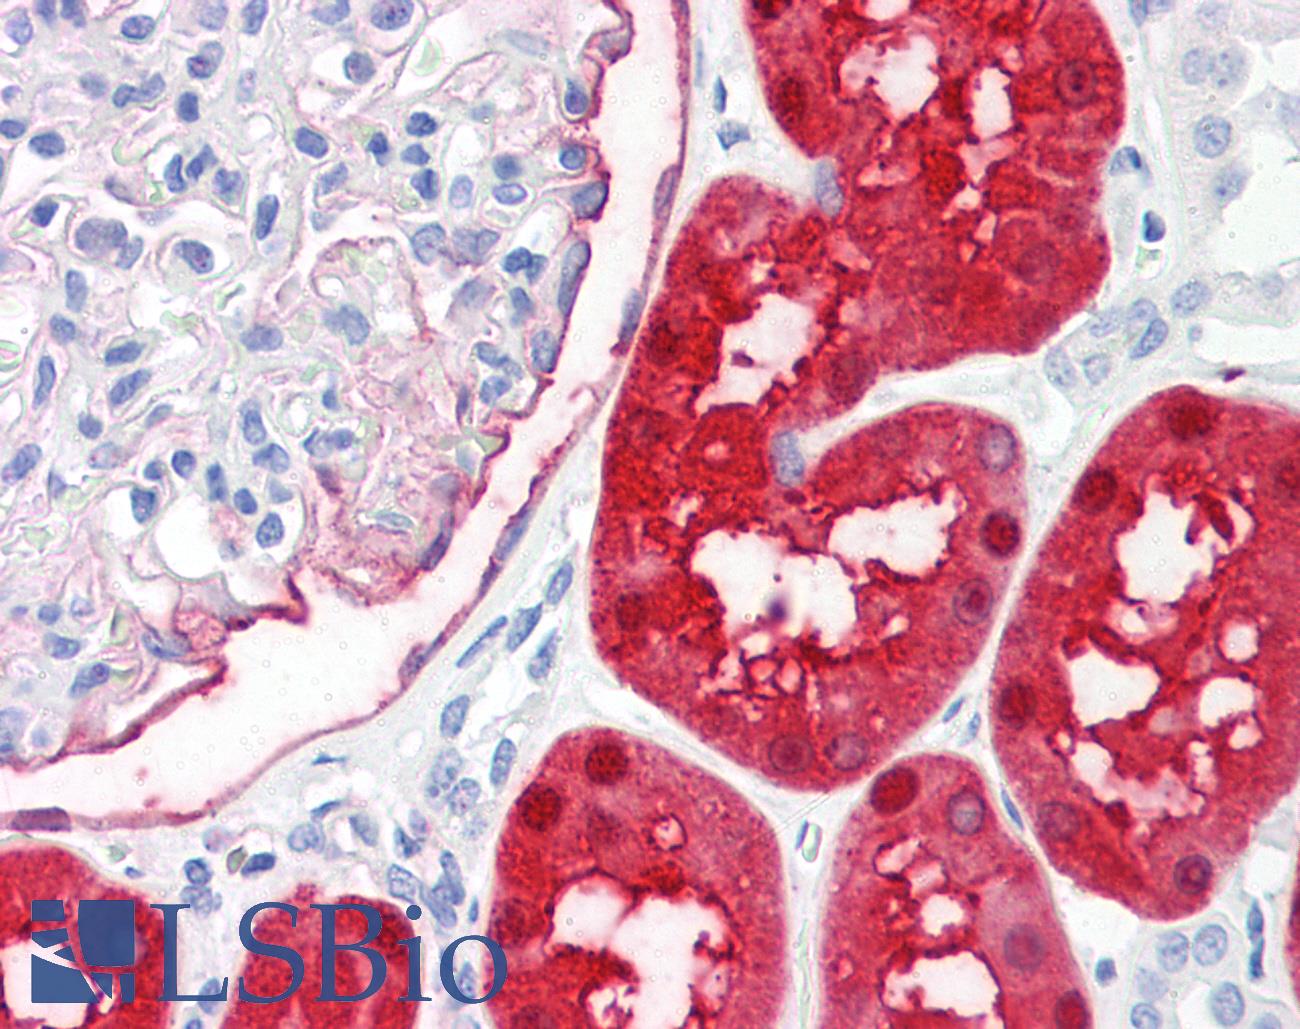 DDC / DOPA Decarboxylase Antibody - Anti-AADC / DOPA Decarboxylase antibody IHC of human kidney. Immunohistochemistry of formalin-fixed, paraffin-embedded tissue after heat-induced antigen retrieval. Antibody dilution 1:100.